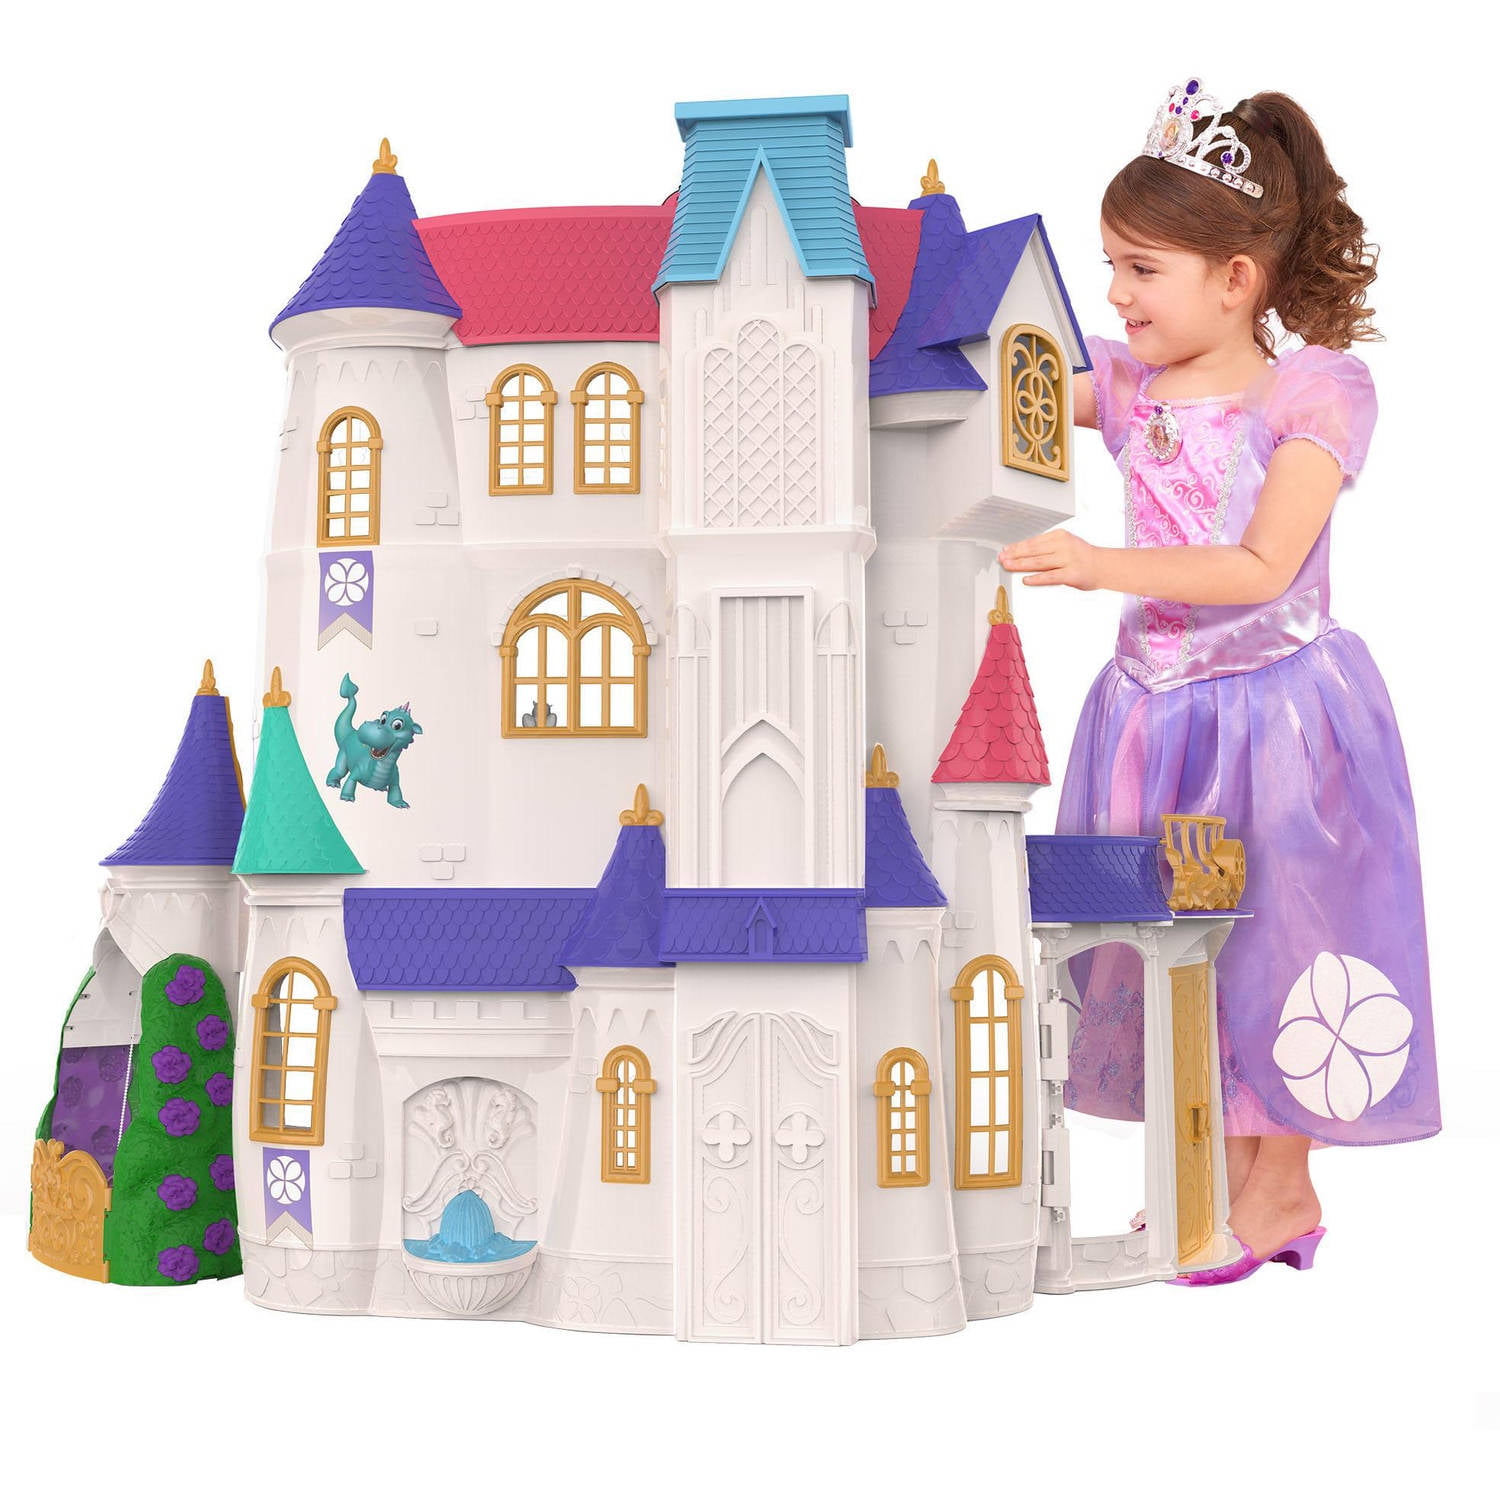 sofia the first castle